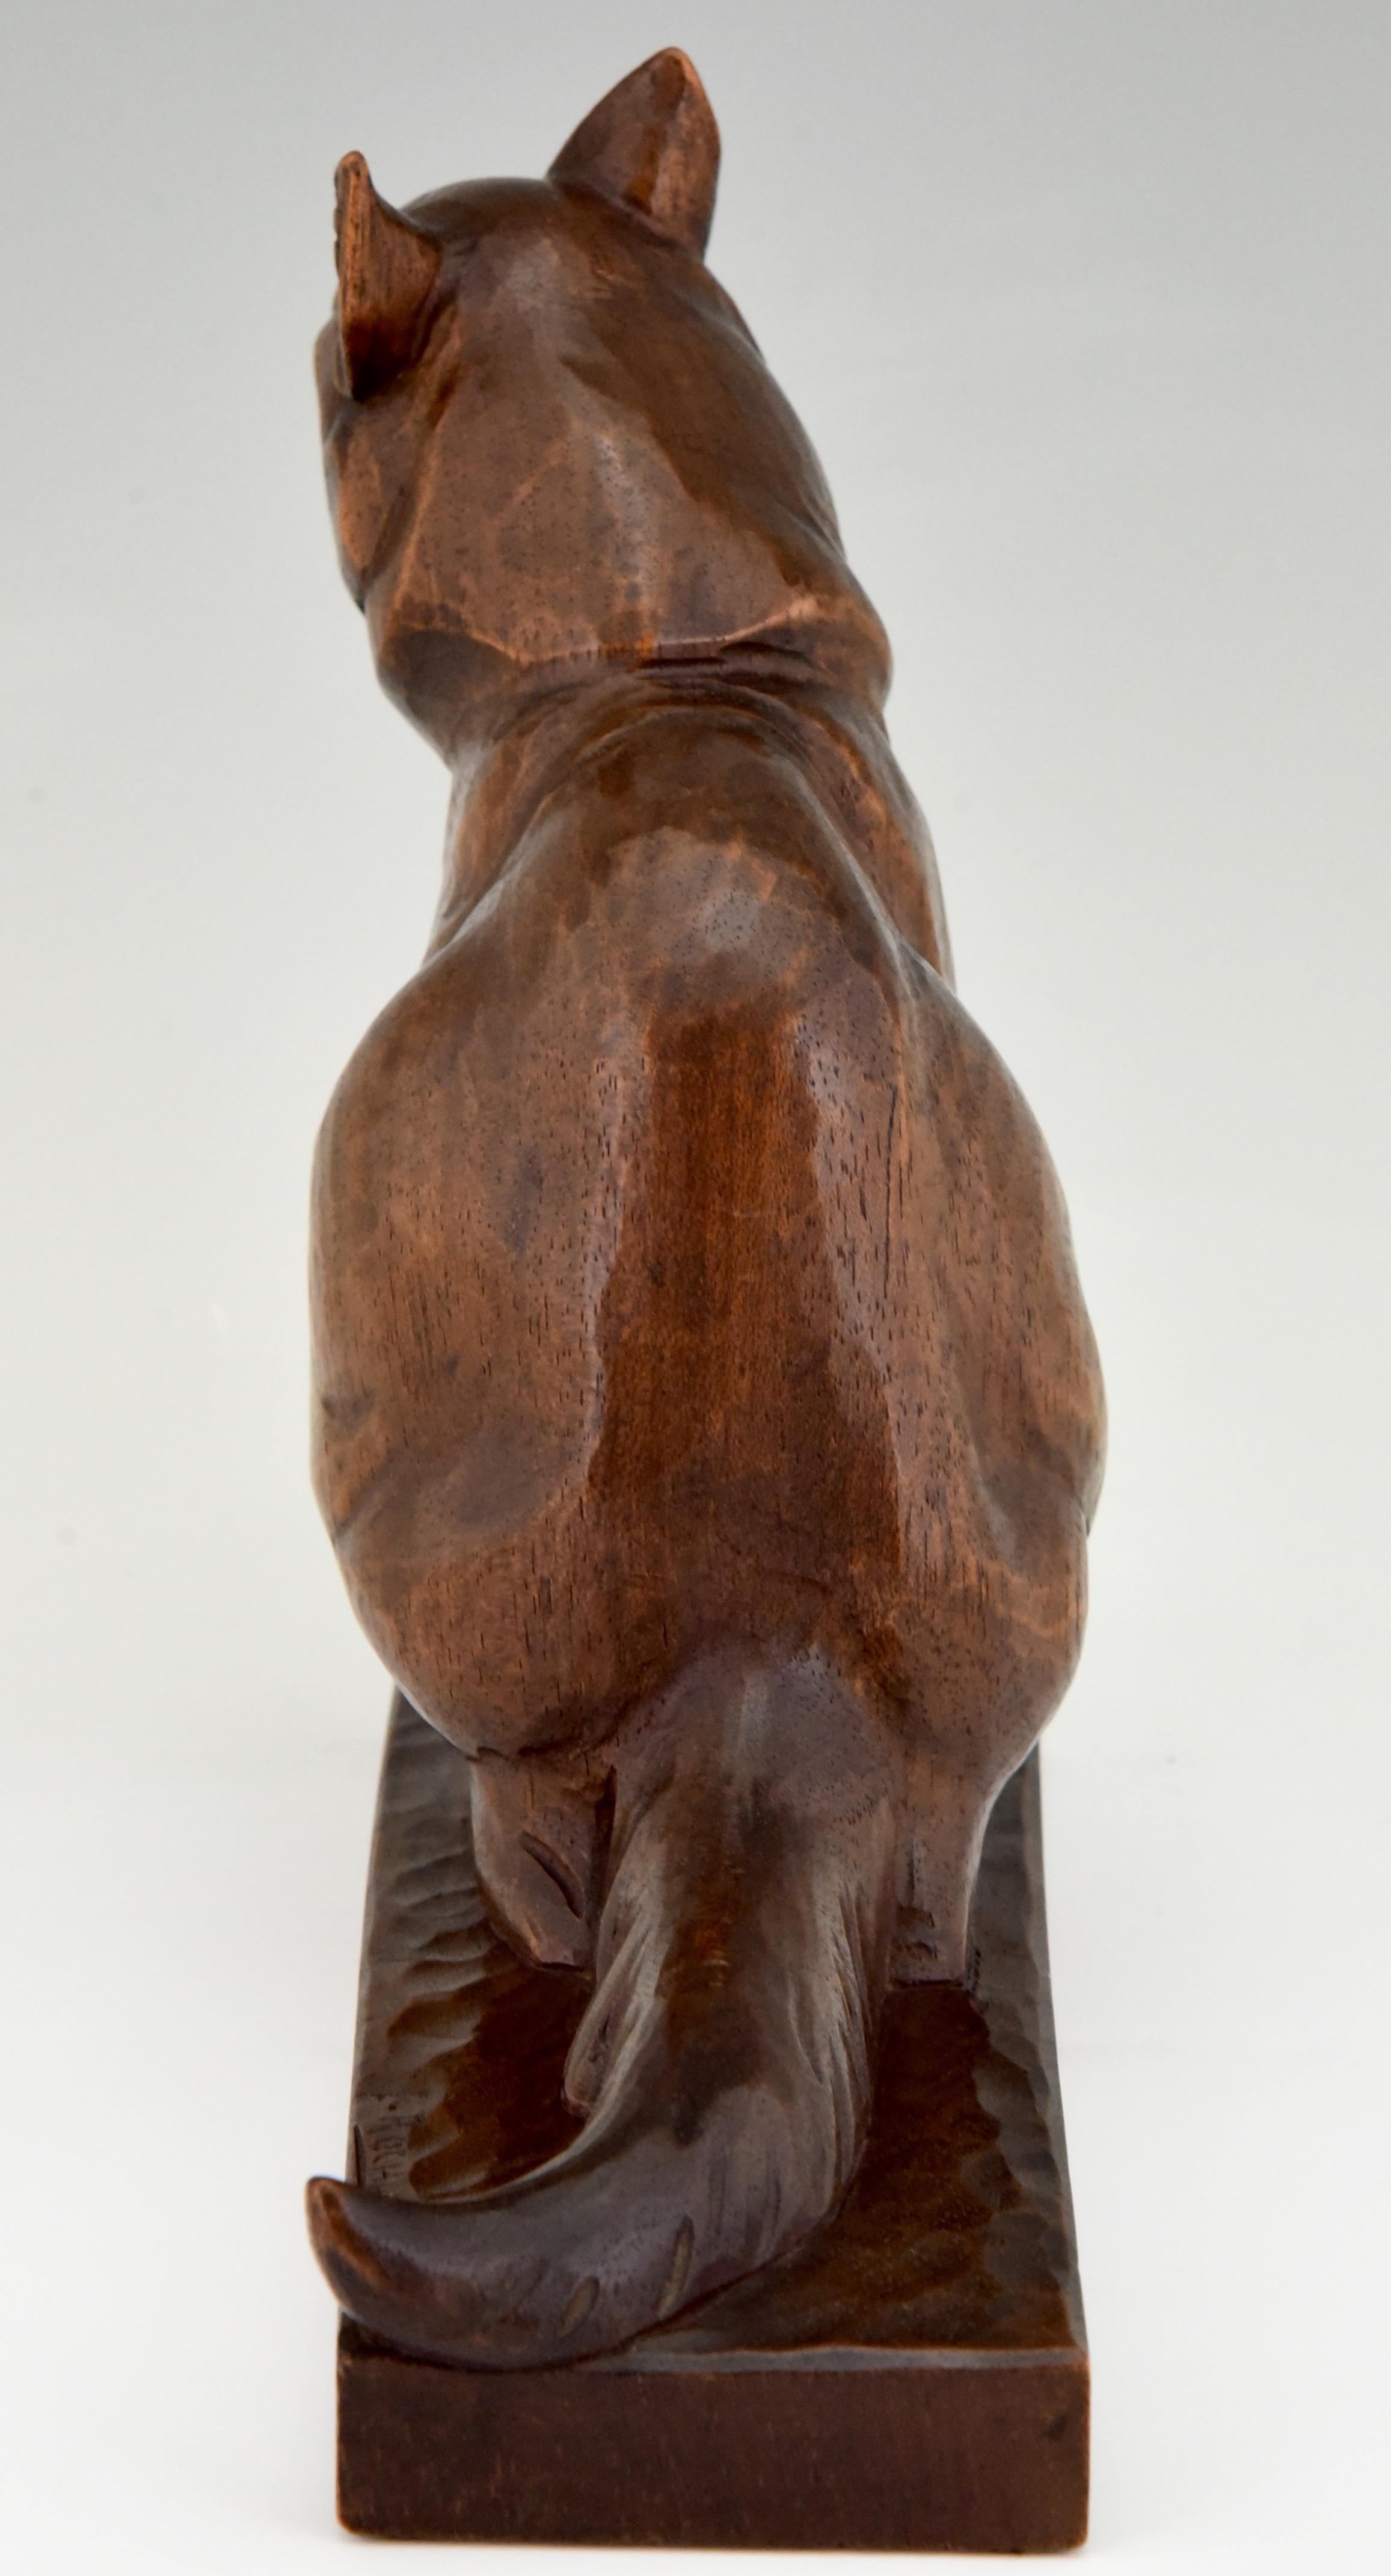 Mid-20th Century Art Deco Wooden Sculpture of a Cat Hand Carved Irenee Rochard, France, 1930